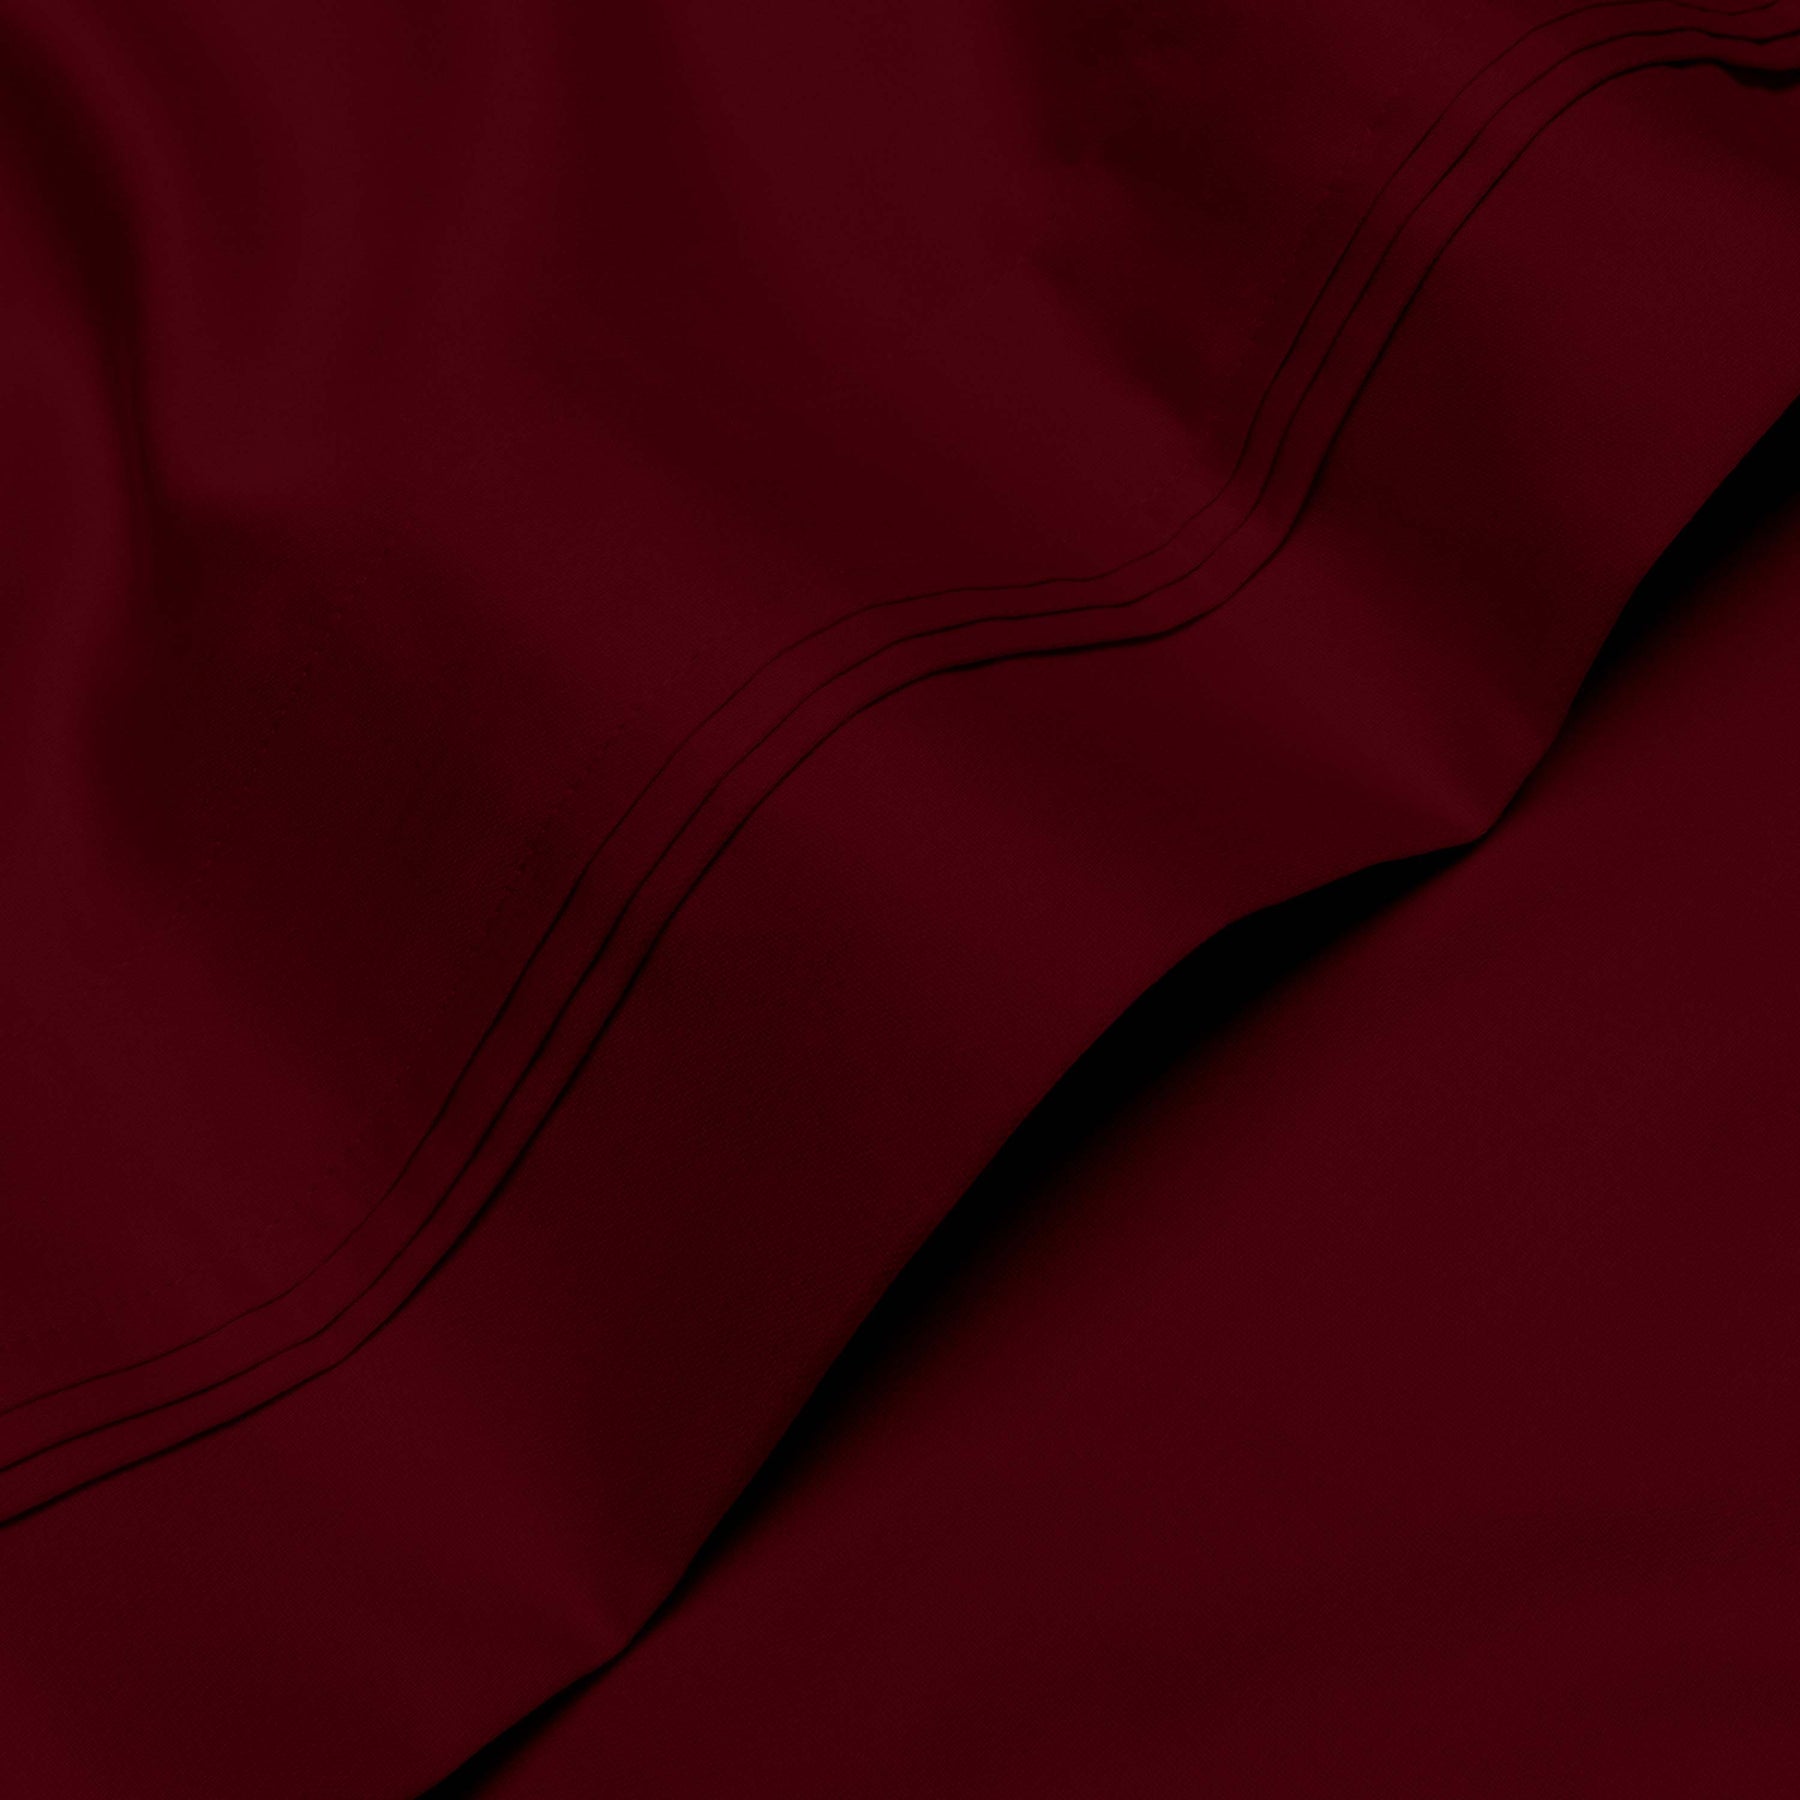 Egyptian Cotton 1000 Thread Count Eco-Friendly Solid Sheet Set - Burgundy